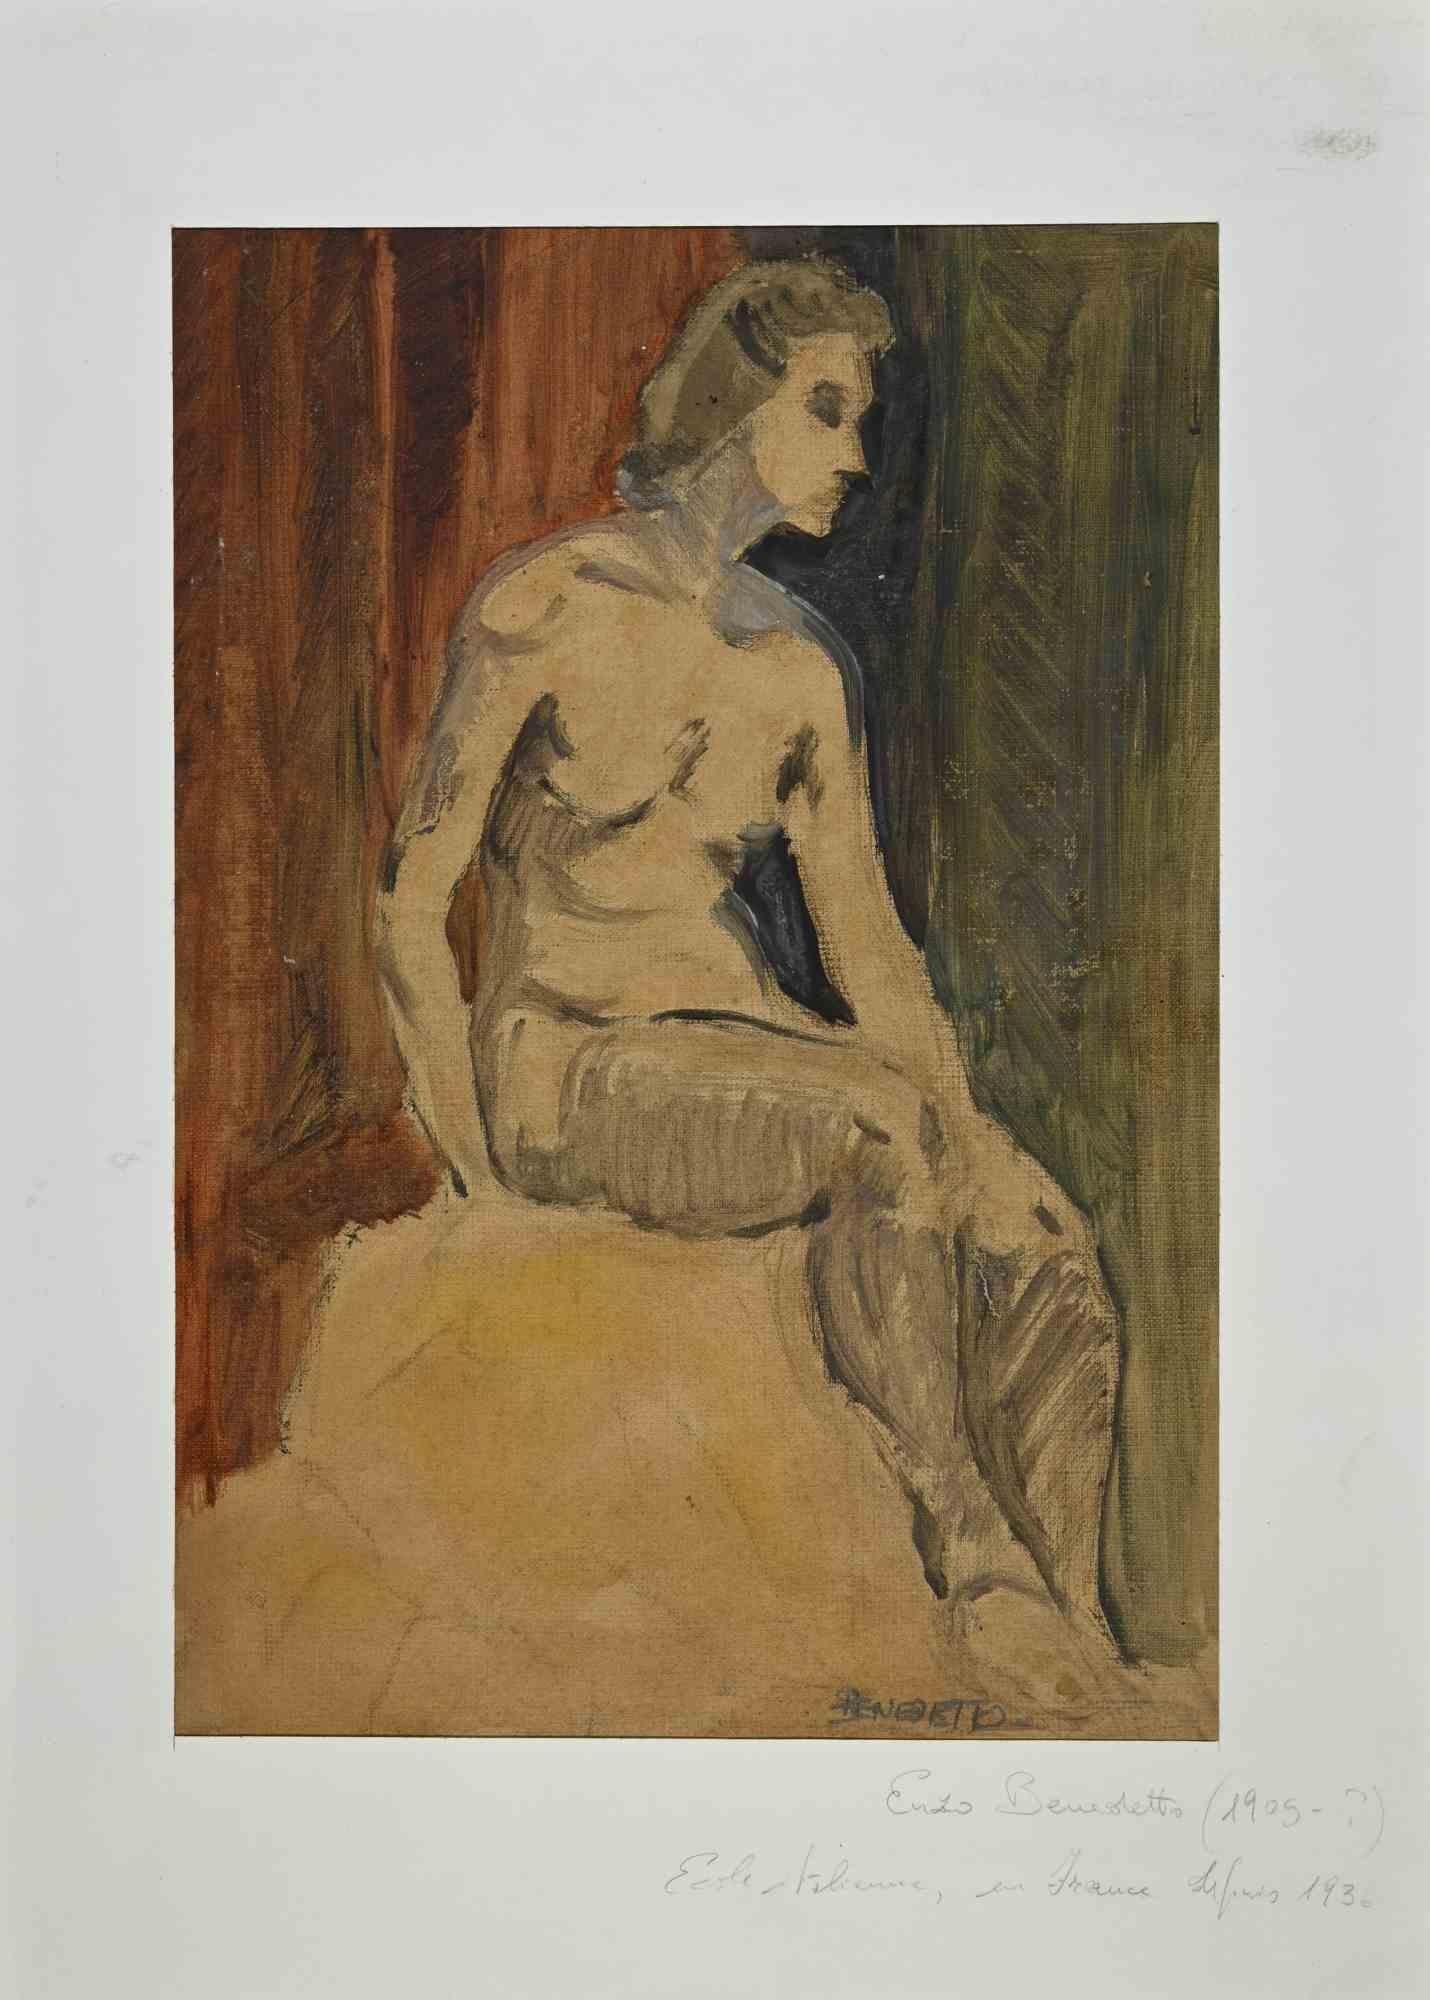 Portrait of a Woman is an Artwork realized by the Italian Artist Enzo Benedetto.

Pencil, ink and Tempera on paper. Hand signed on the right margin. The work is glued on cardboard.

Total dimensions: 44x32 cm.